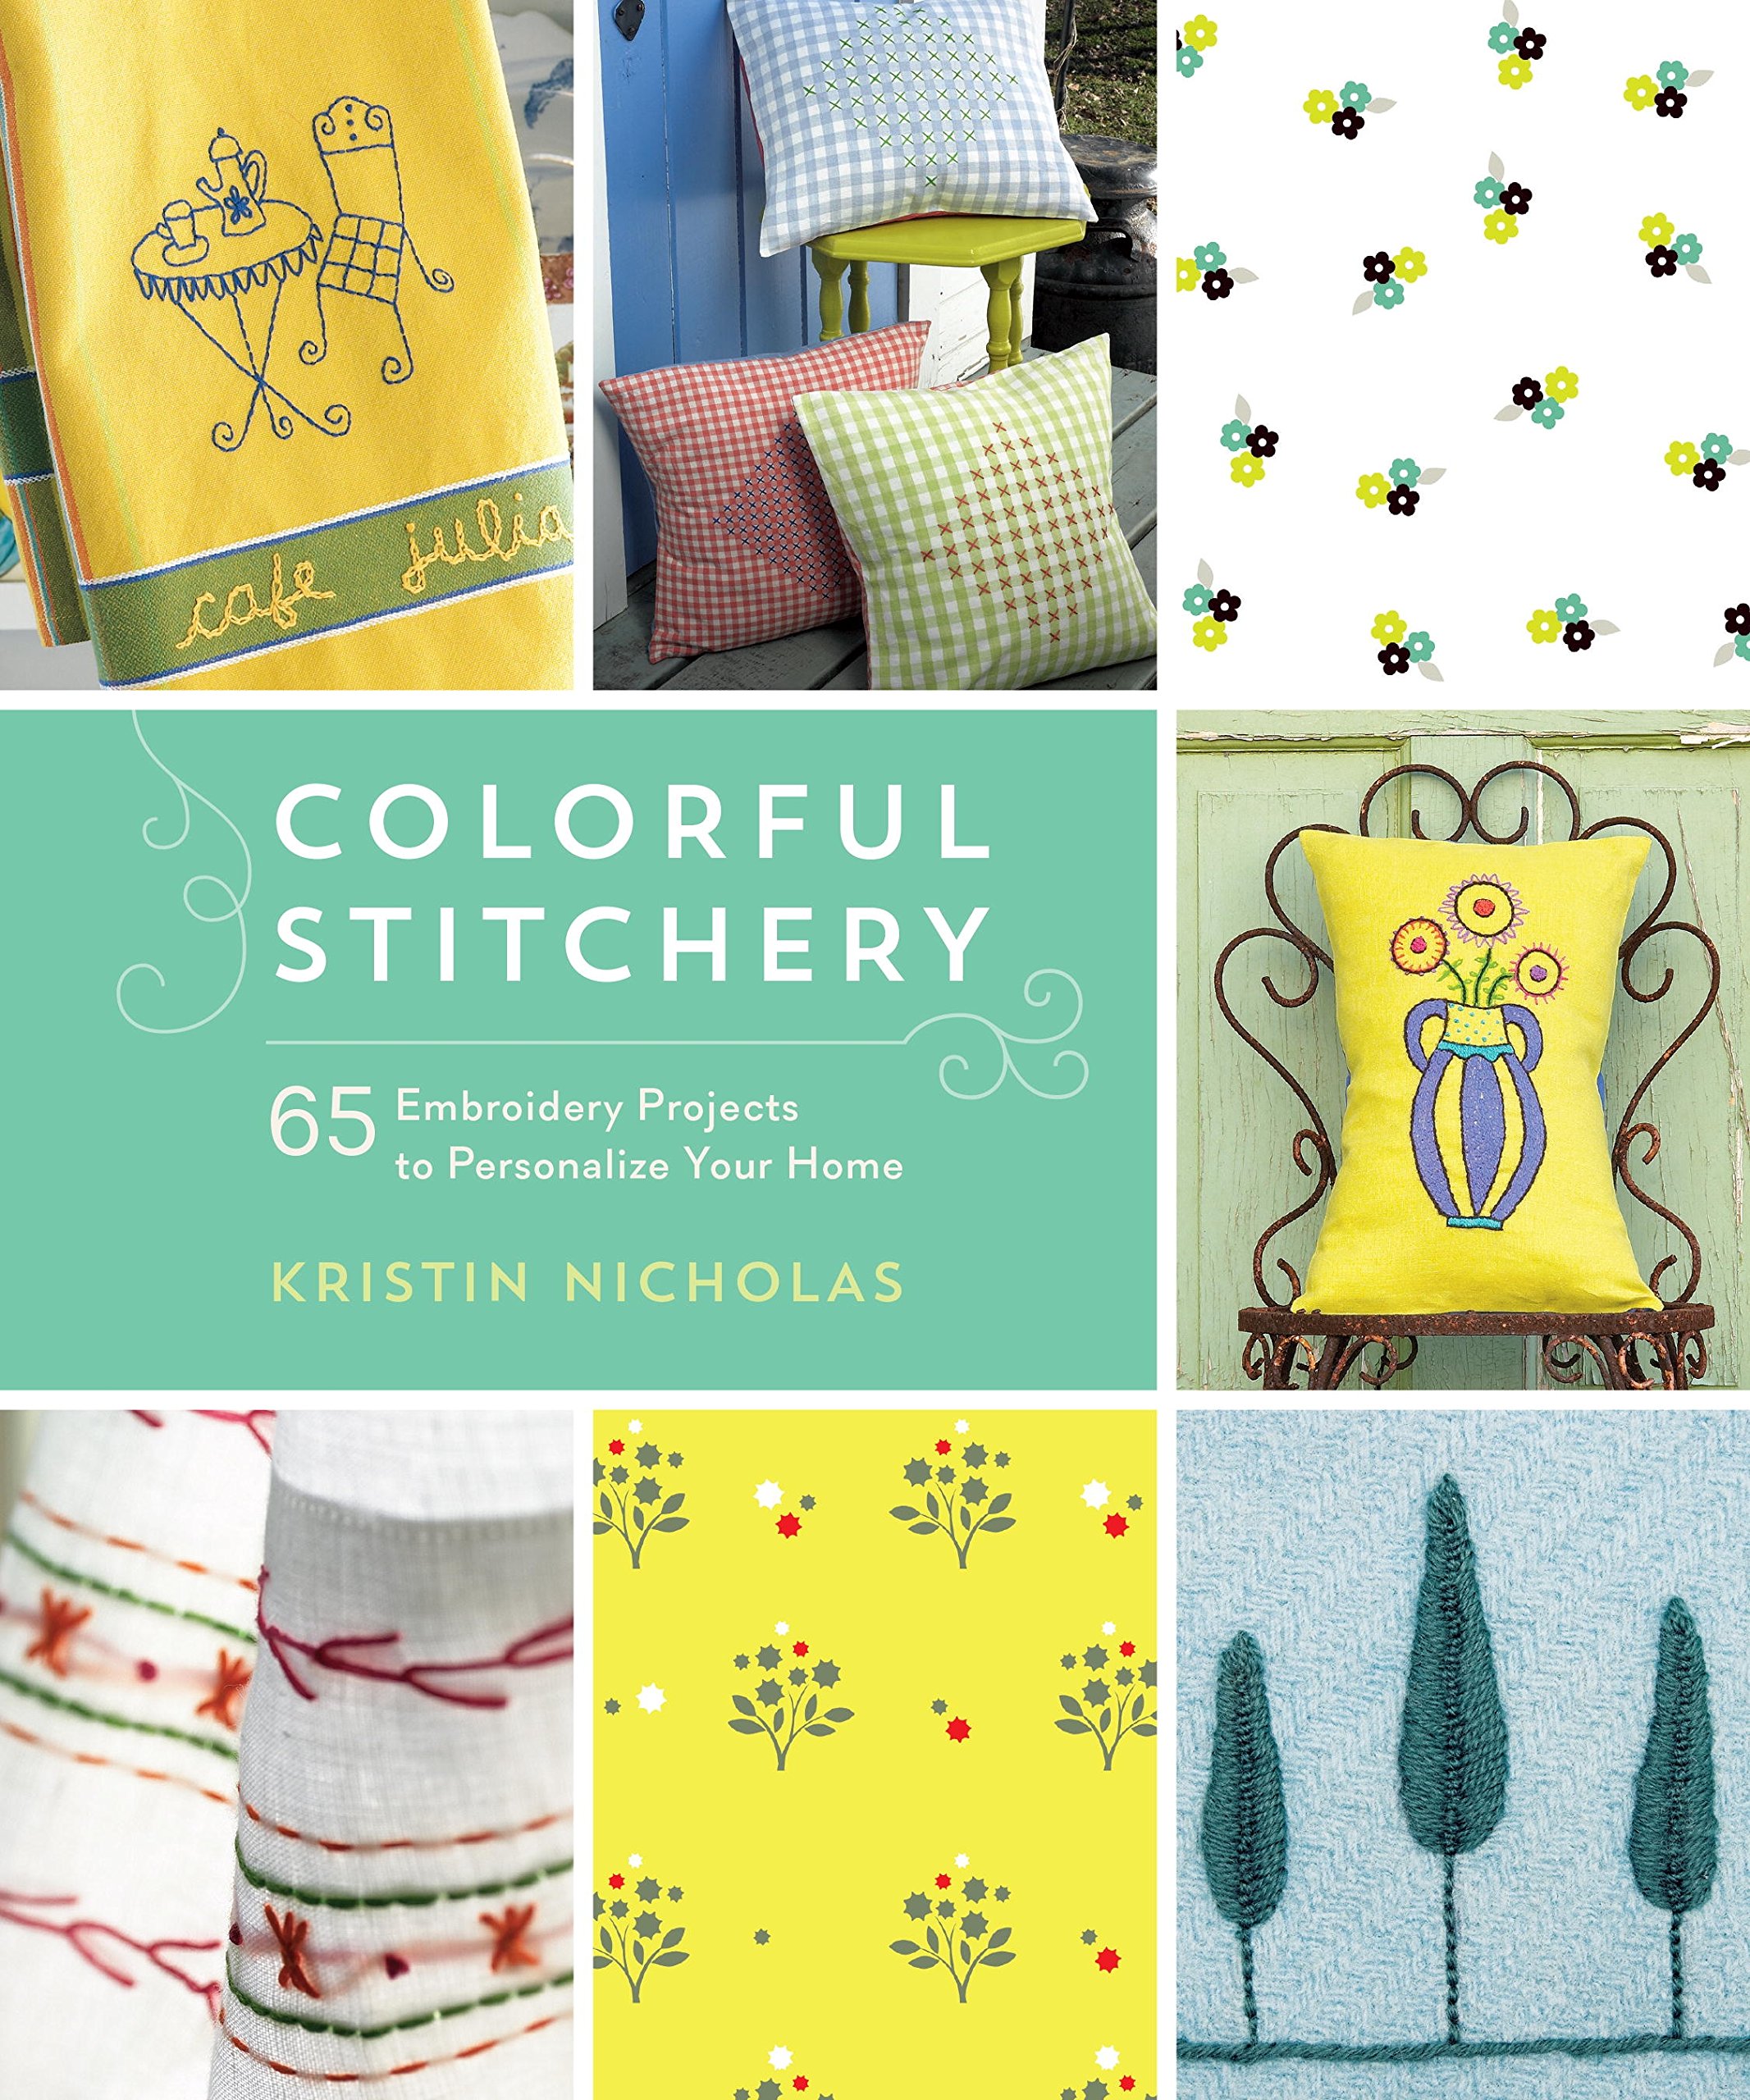 Colorful Stitchery: 65 Embroidery Projects to Personalize Your Home by Kristin Nicholas